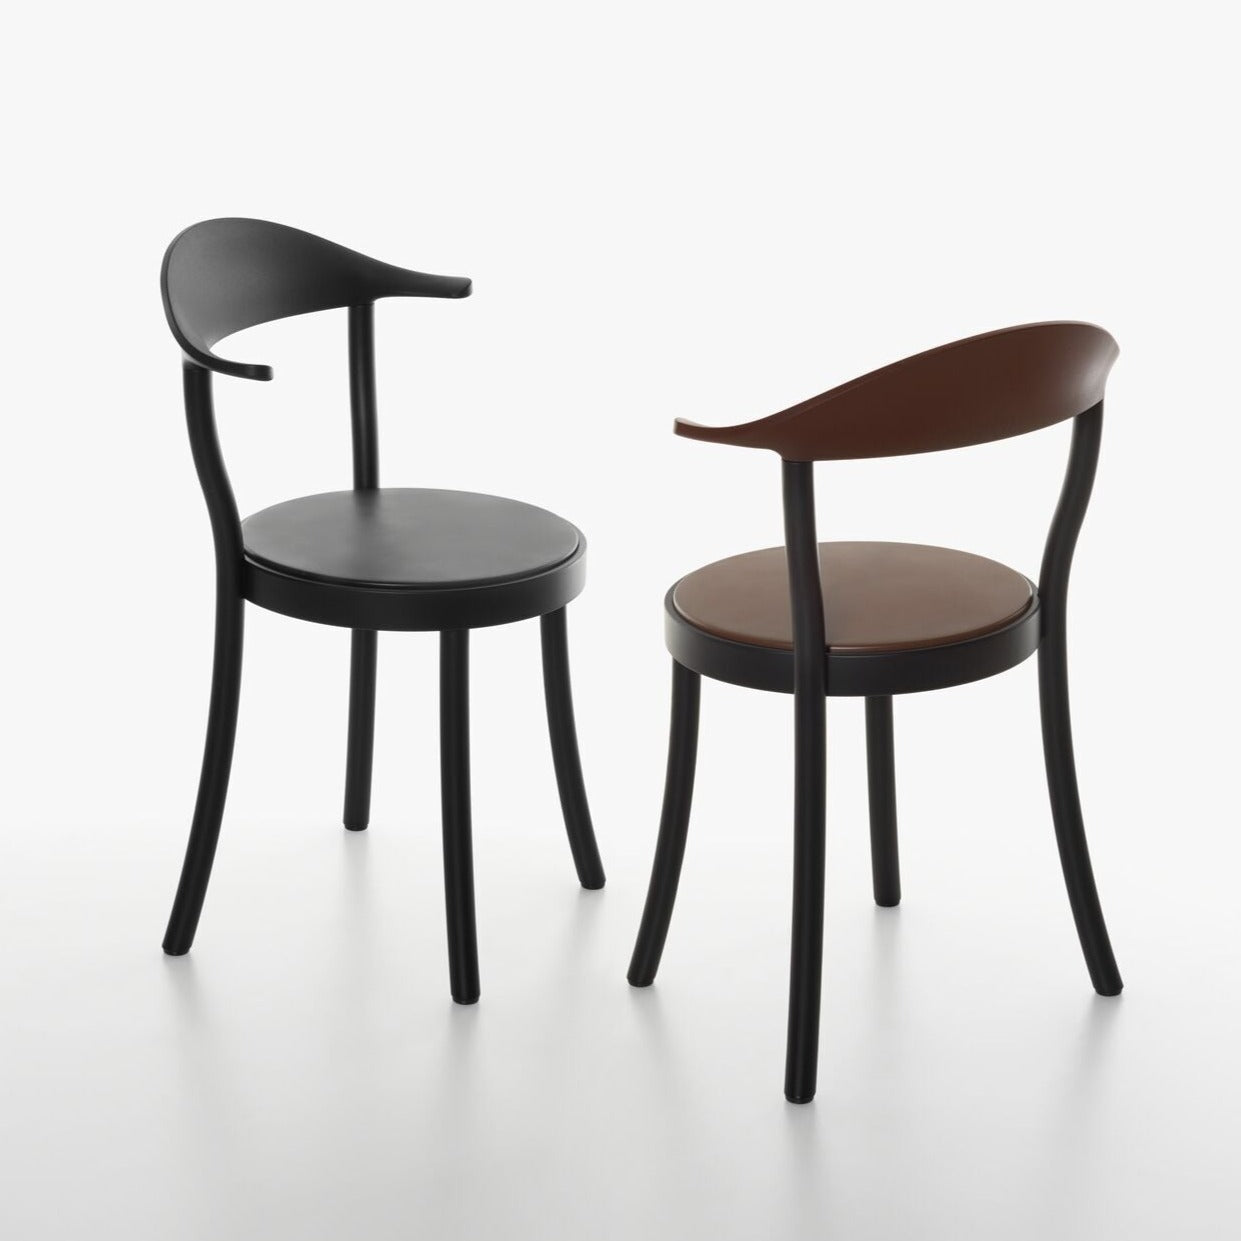 MONZA BISTRO Chair beech wood frame black-brown and black seat and backrest